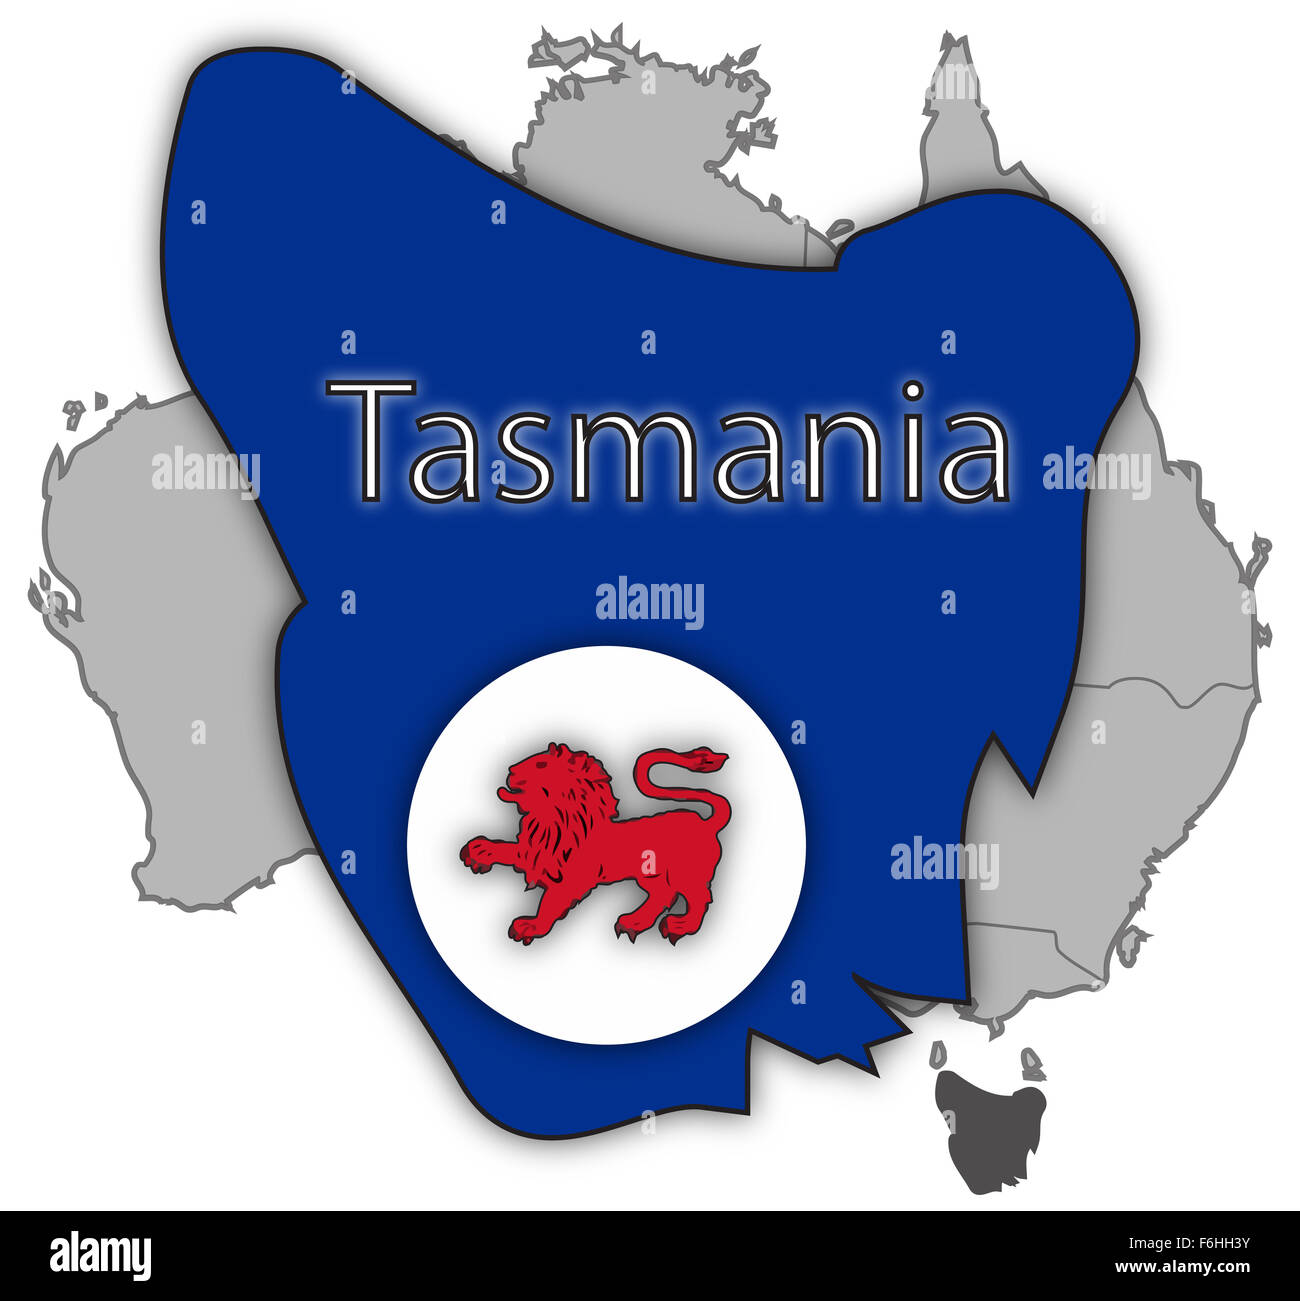 A Tasmania map and flag isolated on a white background Stock Photo